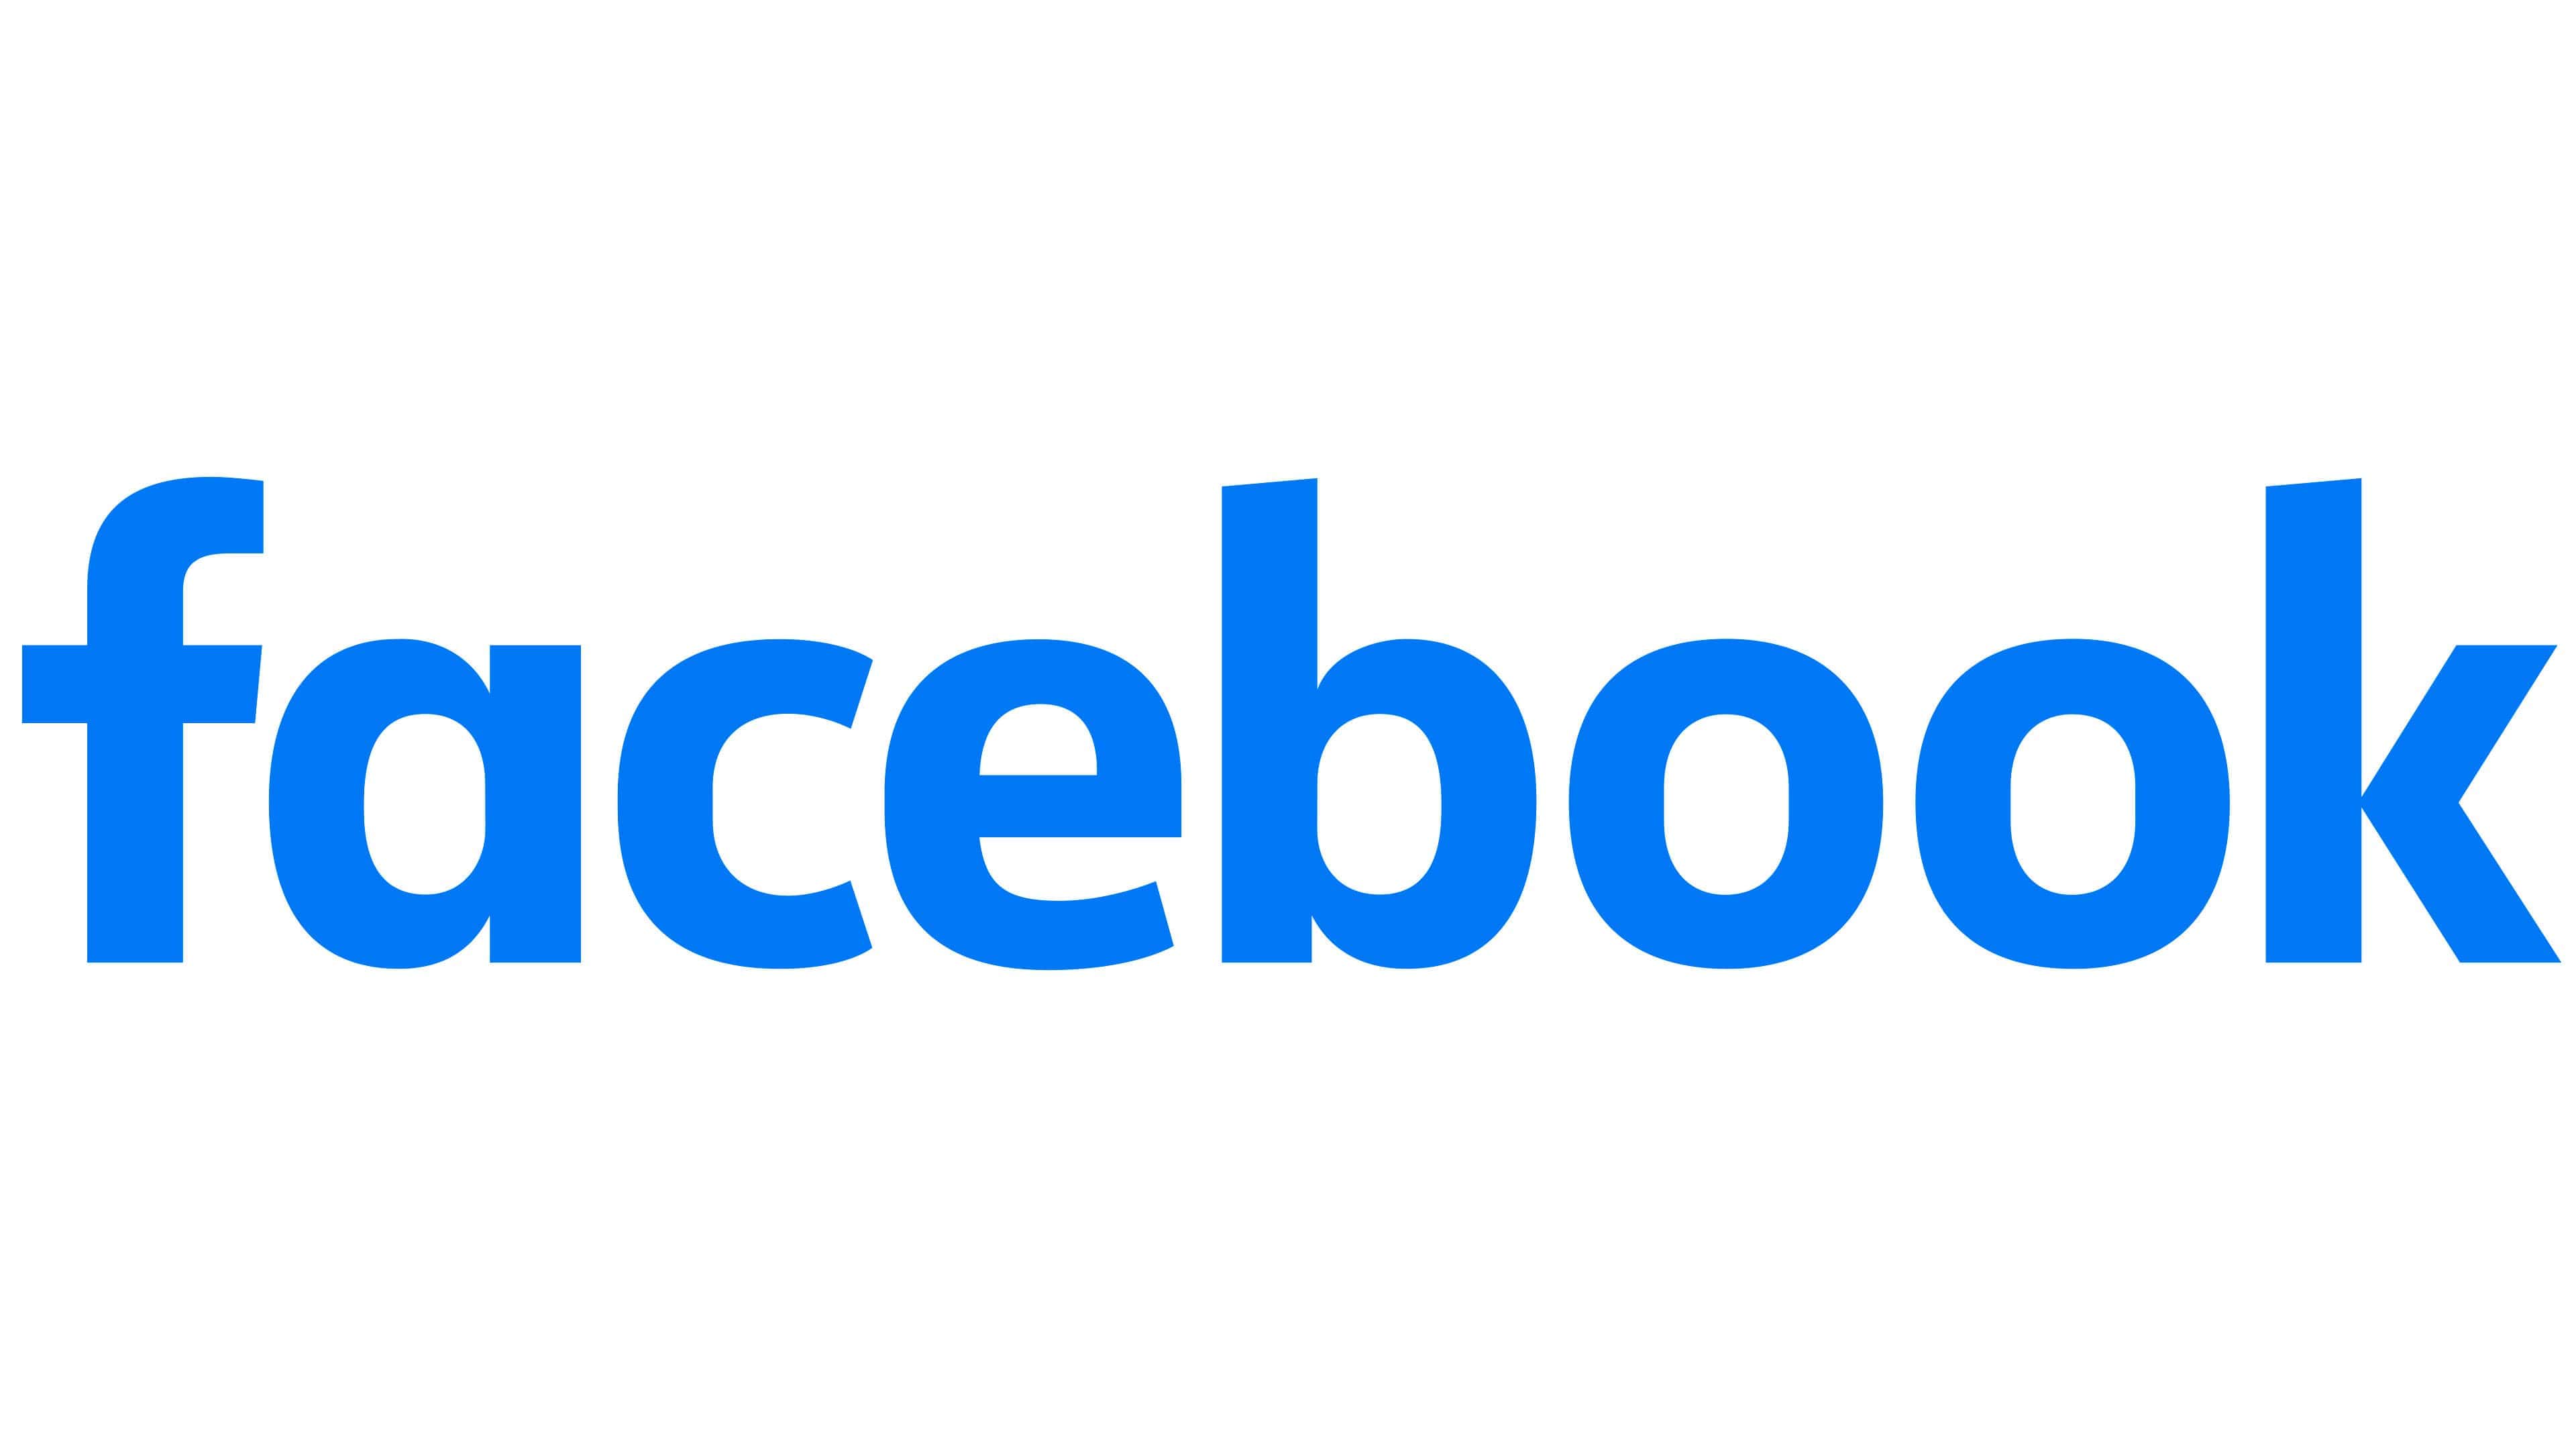 Facebook Logo The Most Famous Brands And Company Logos In The World